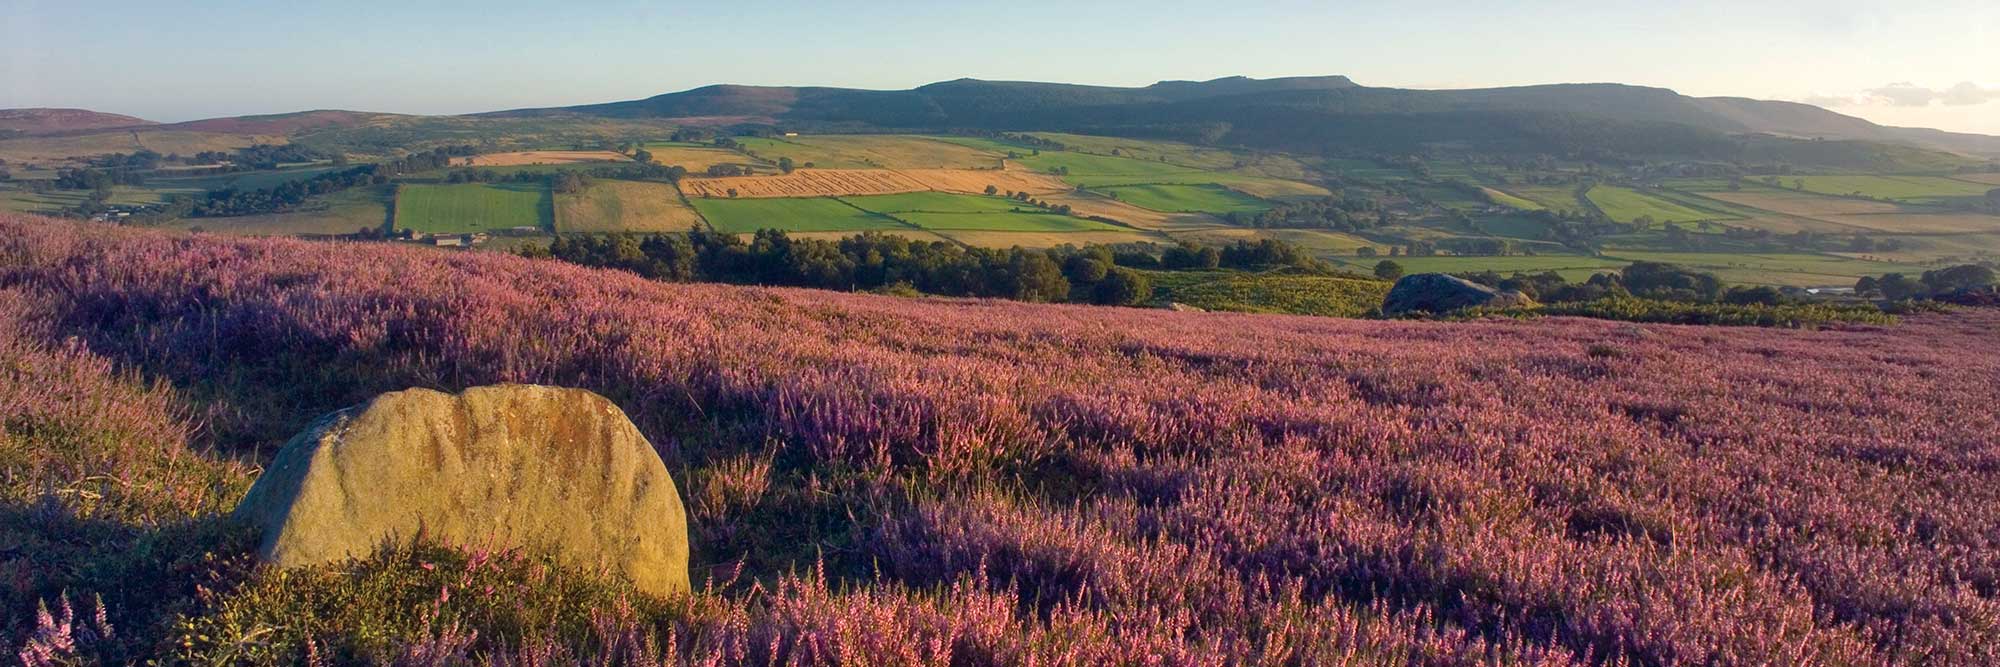 Pink heather with low hills in the distance